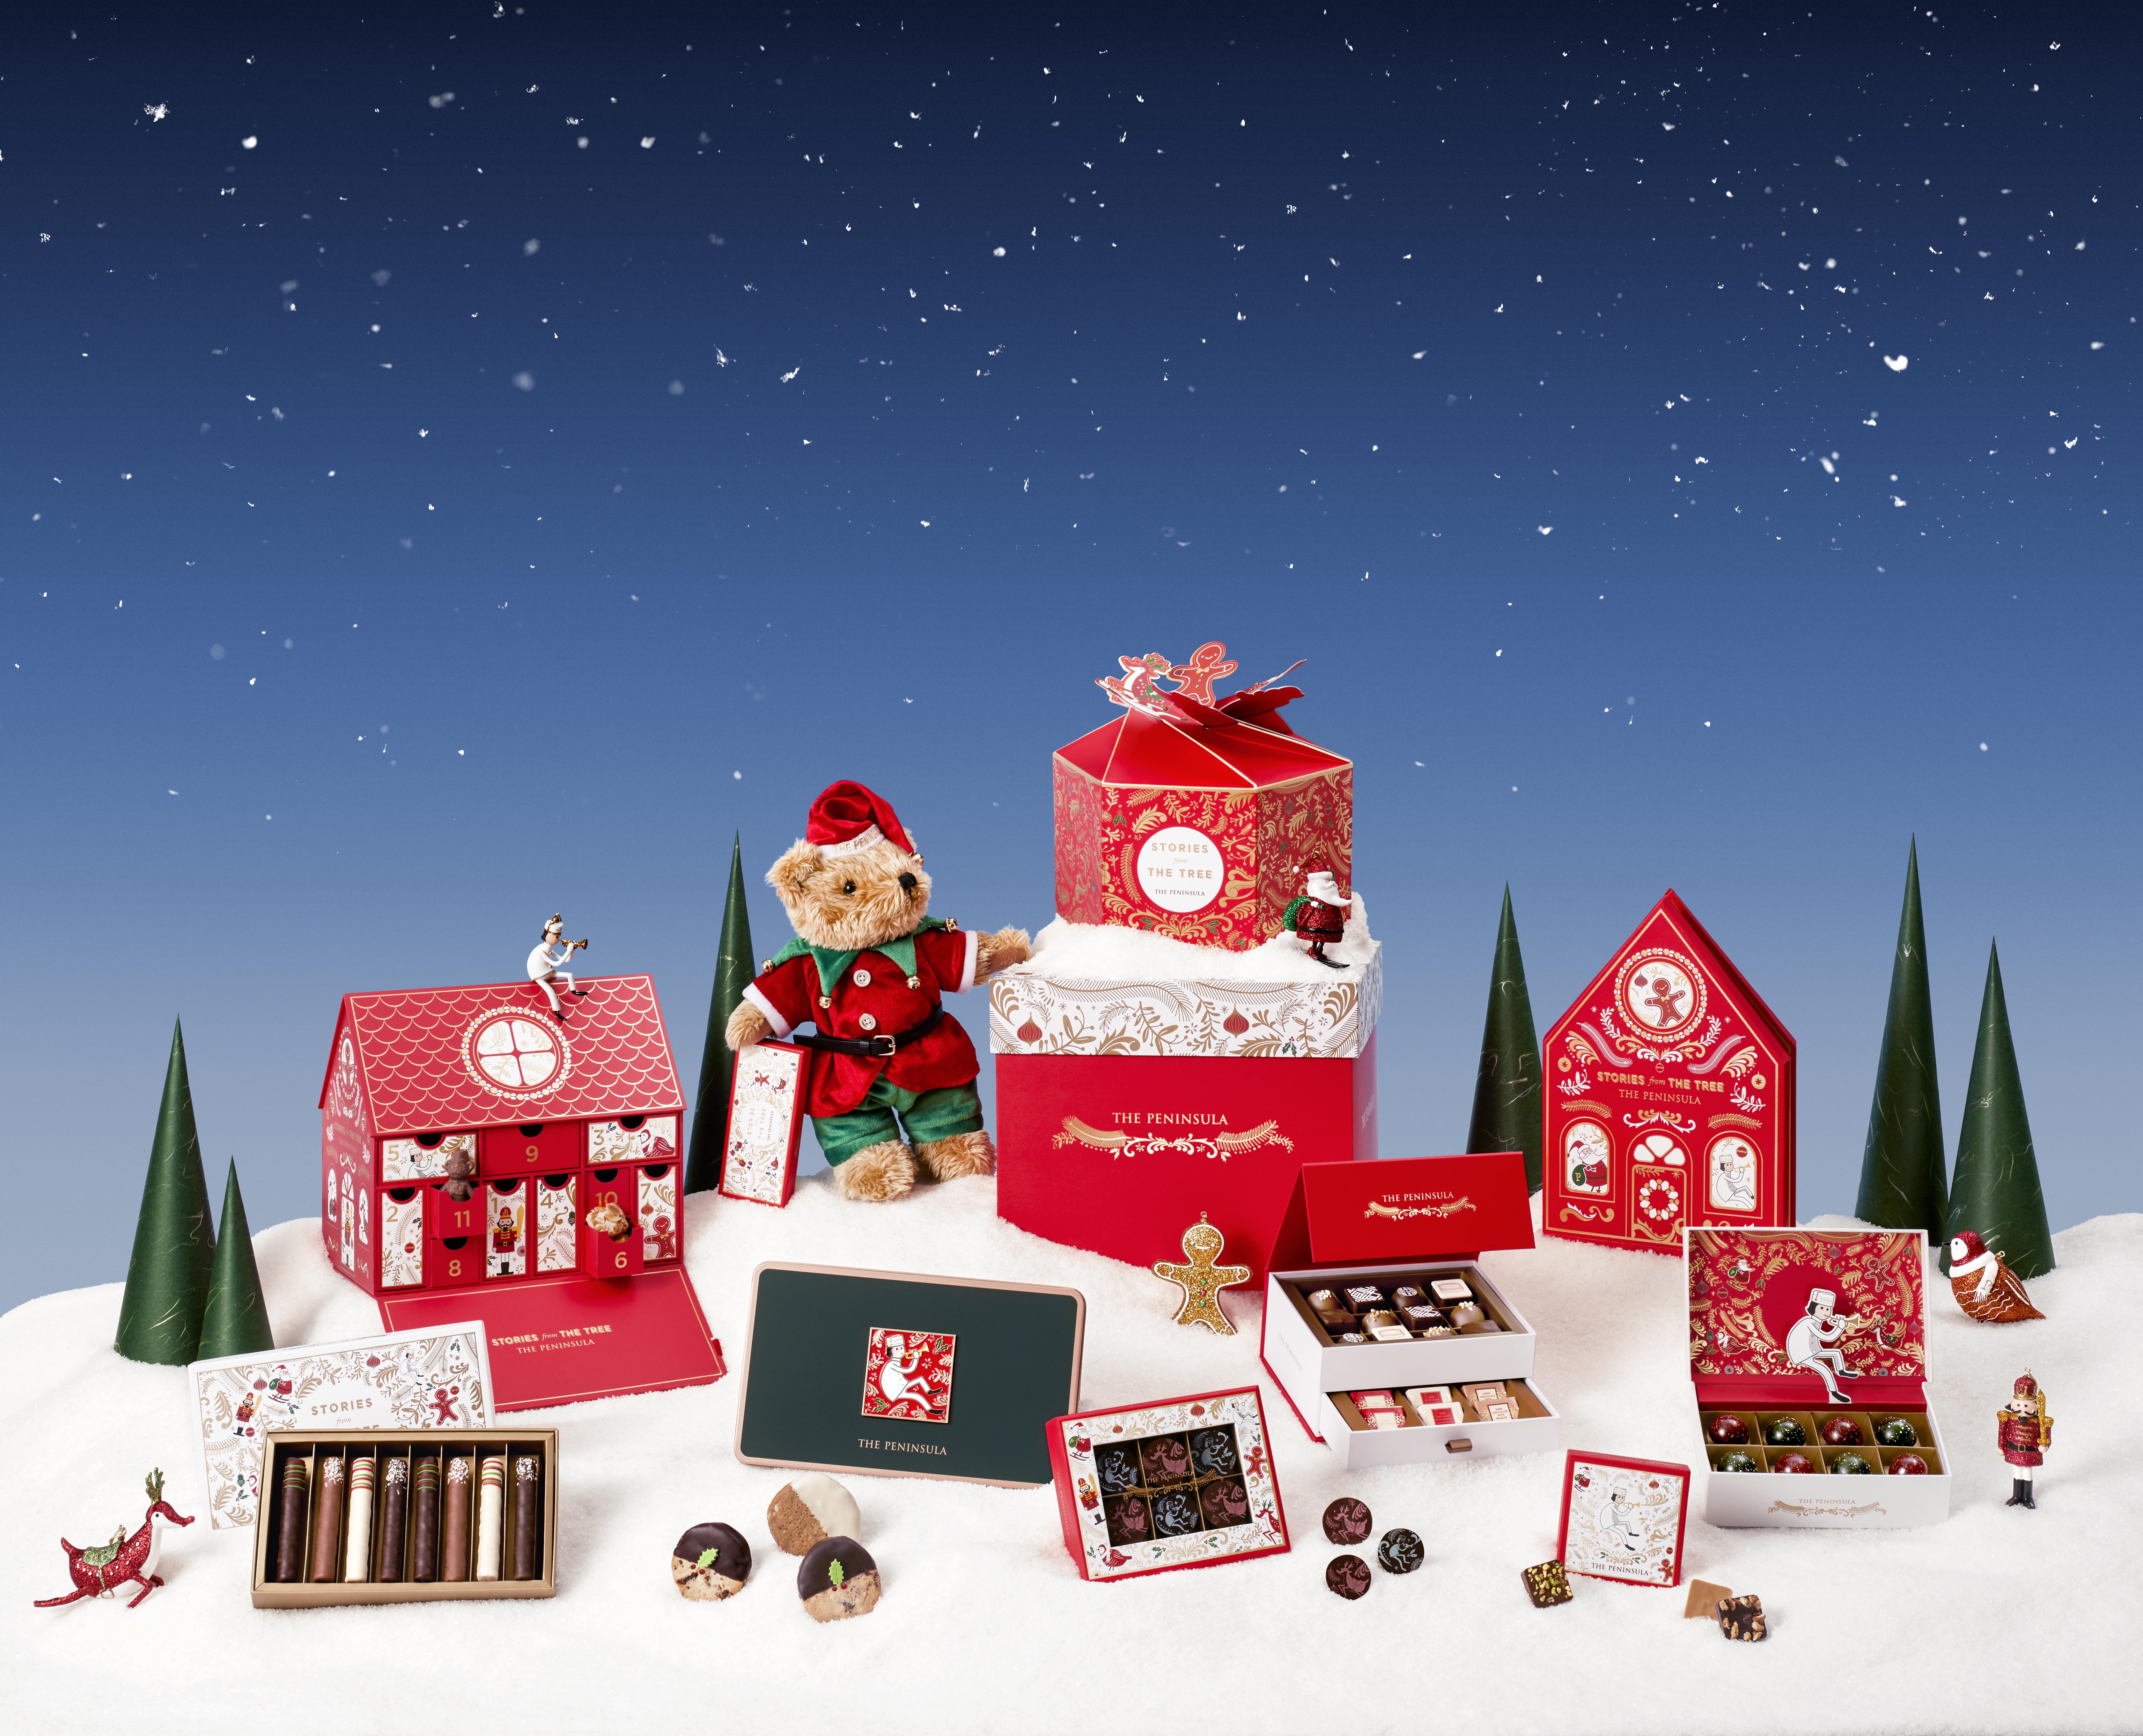 THE PENINSULA BOUTIQUE PRESENTS 2019 FESTIVE COLLECTION   ‘STORIES FROM THE TREE’ – SHARE HOLIDAY CHEER WITH GINGERBREAD MAN